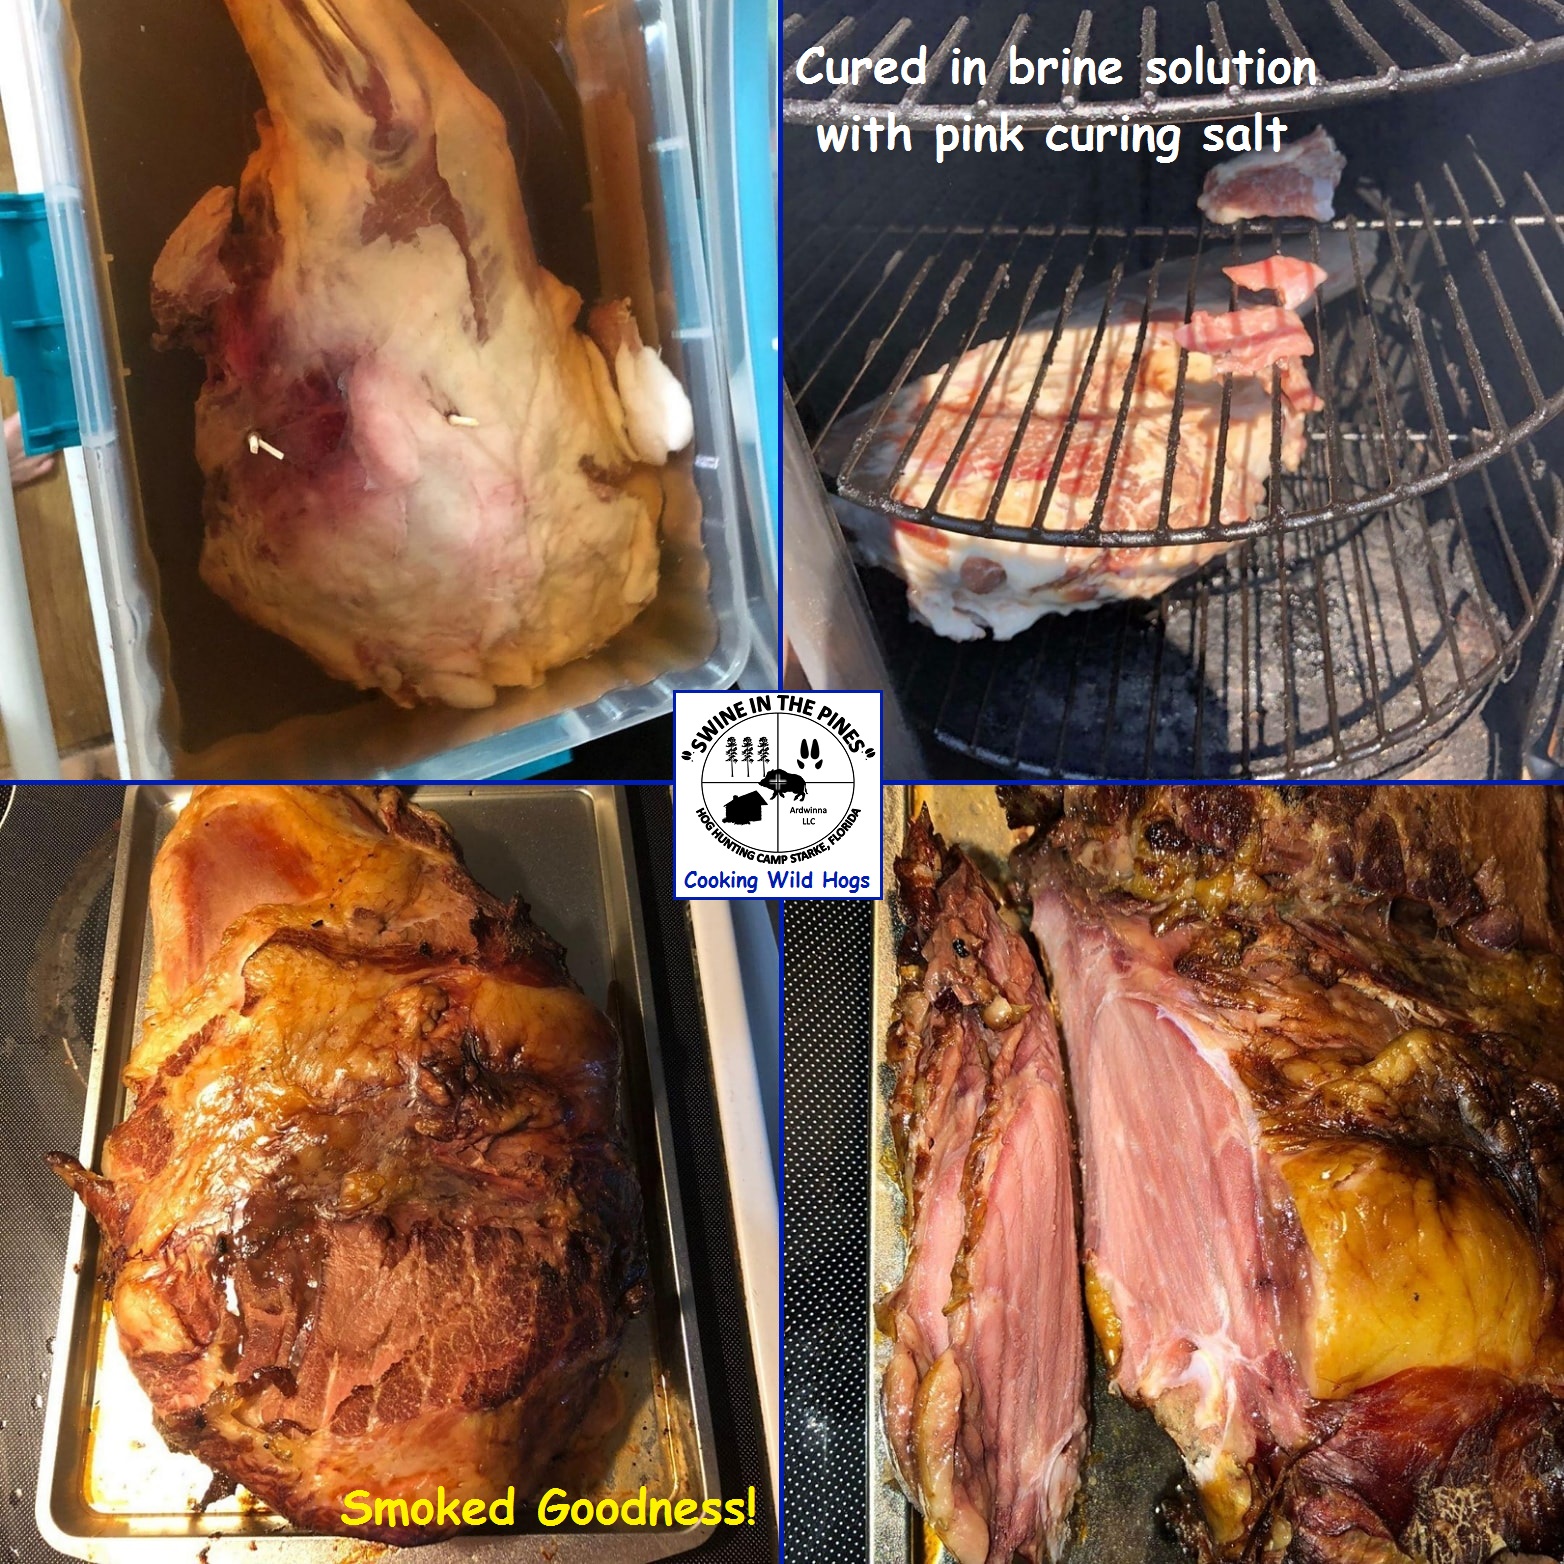 Thanks Will for the pics, Cured in brine solution with pink curing salt, Smoked Goodness!